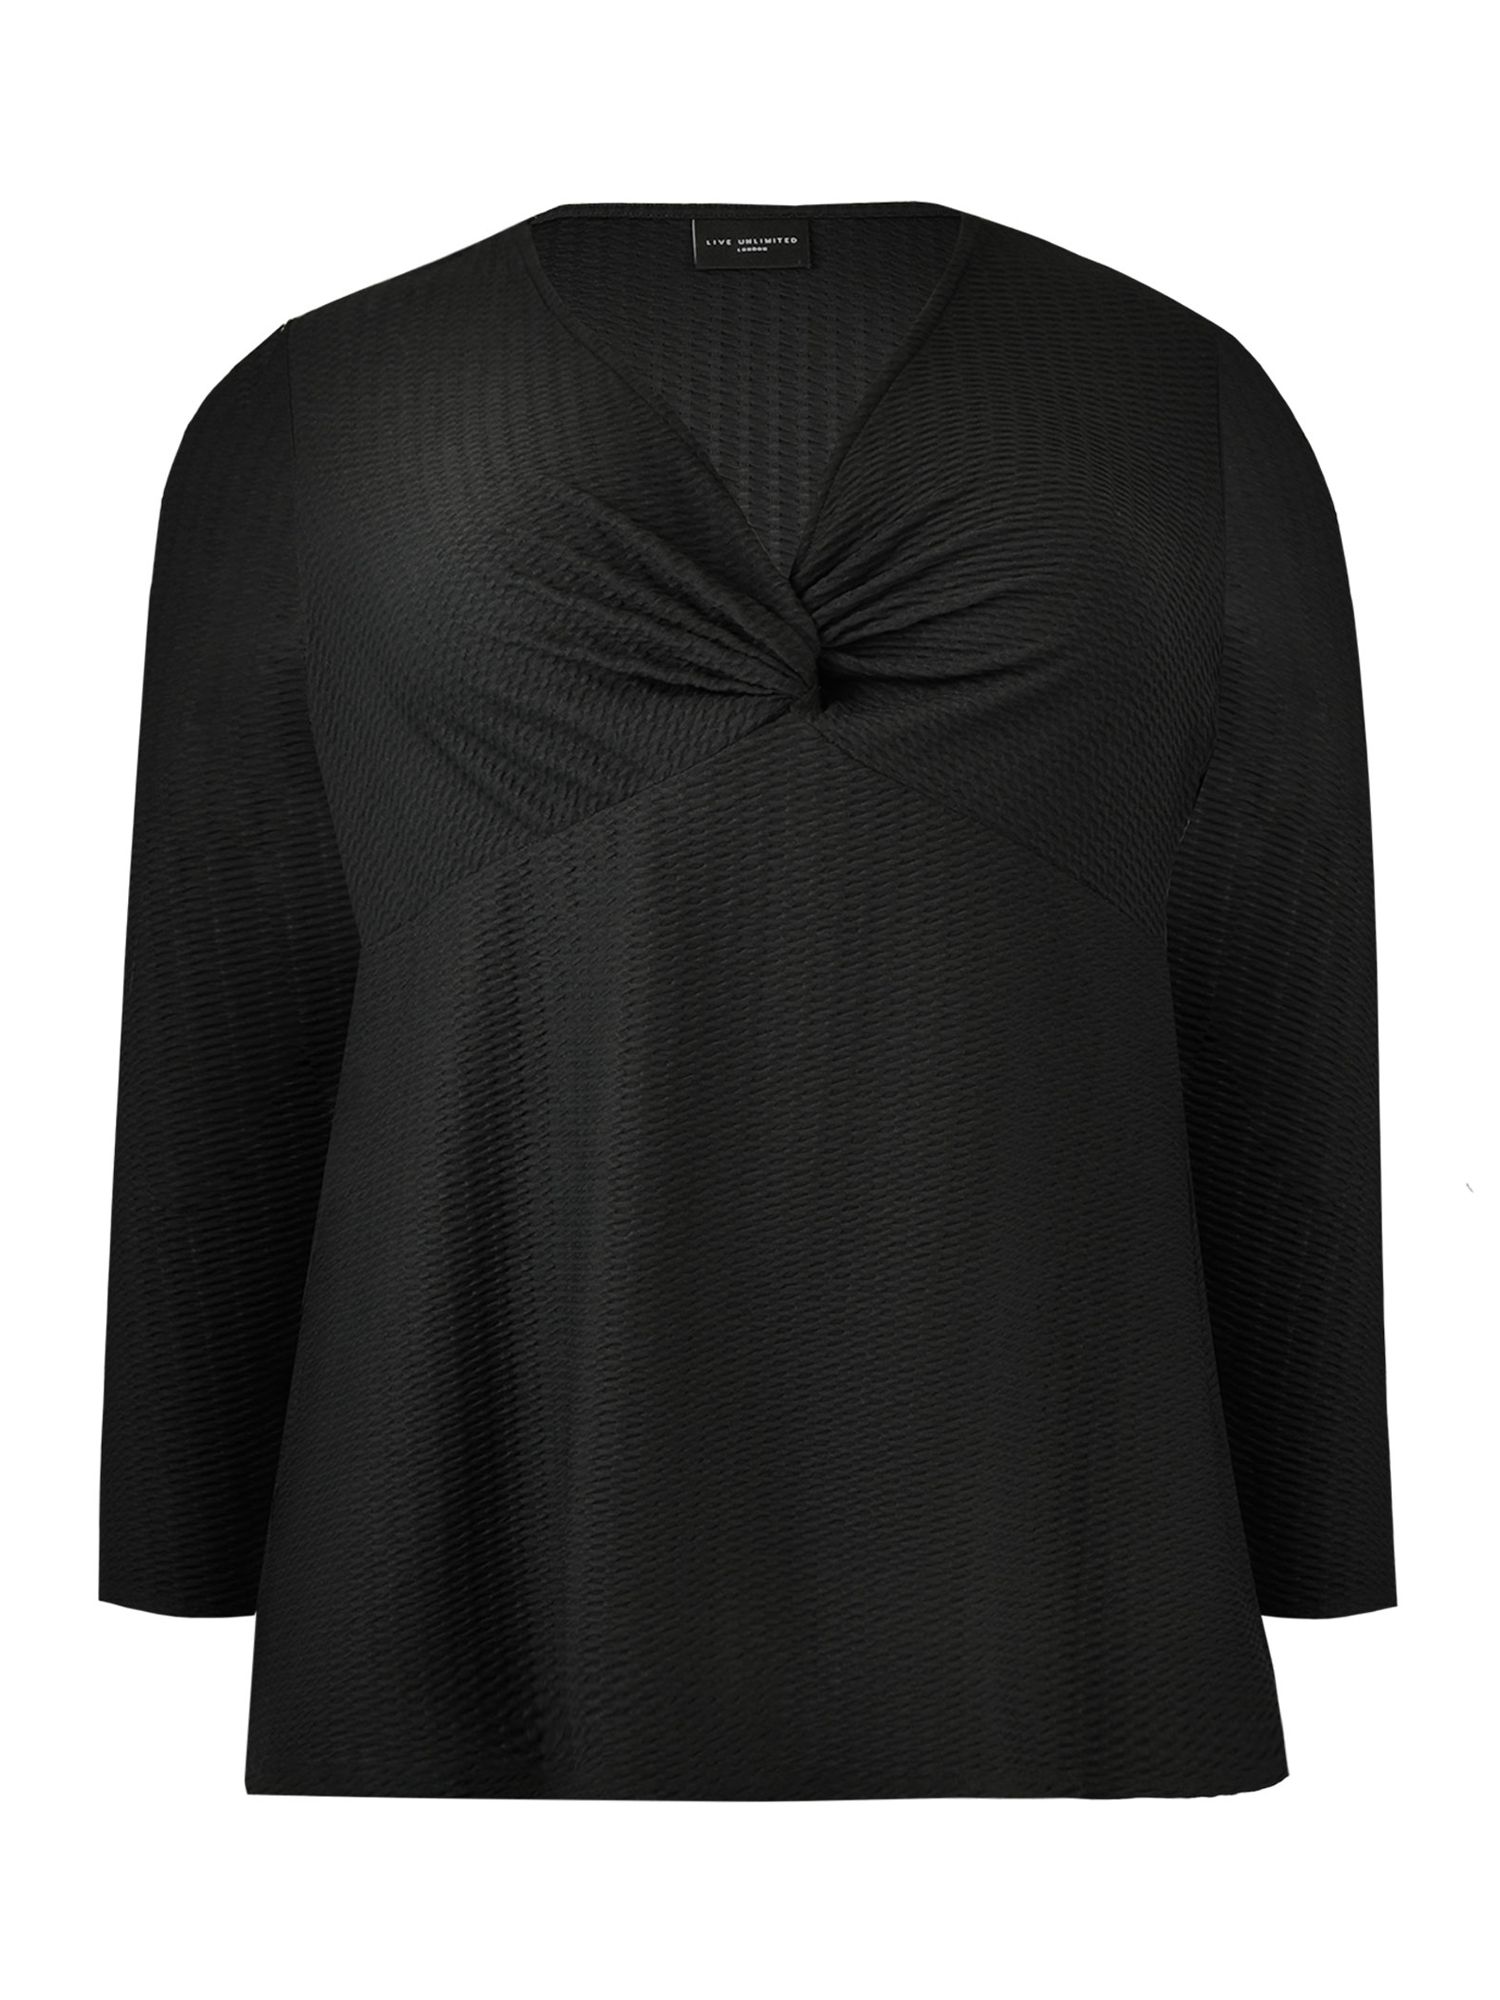 Live Unlimited Textured Twist Front Jersey Top, Black, 12